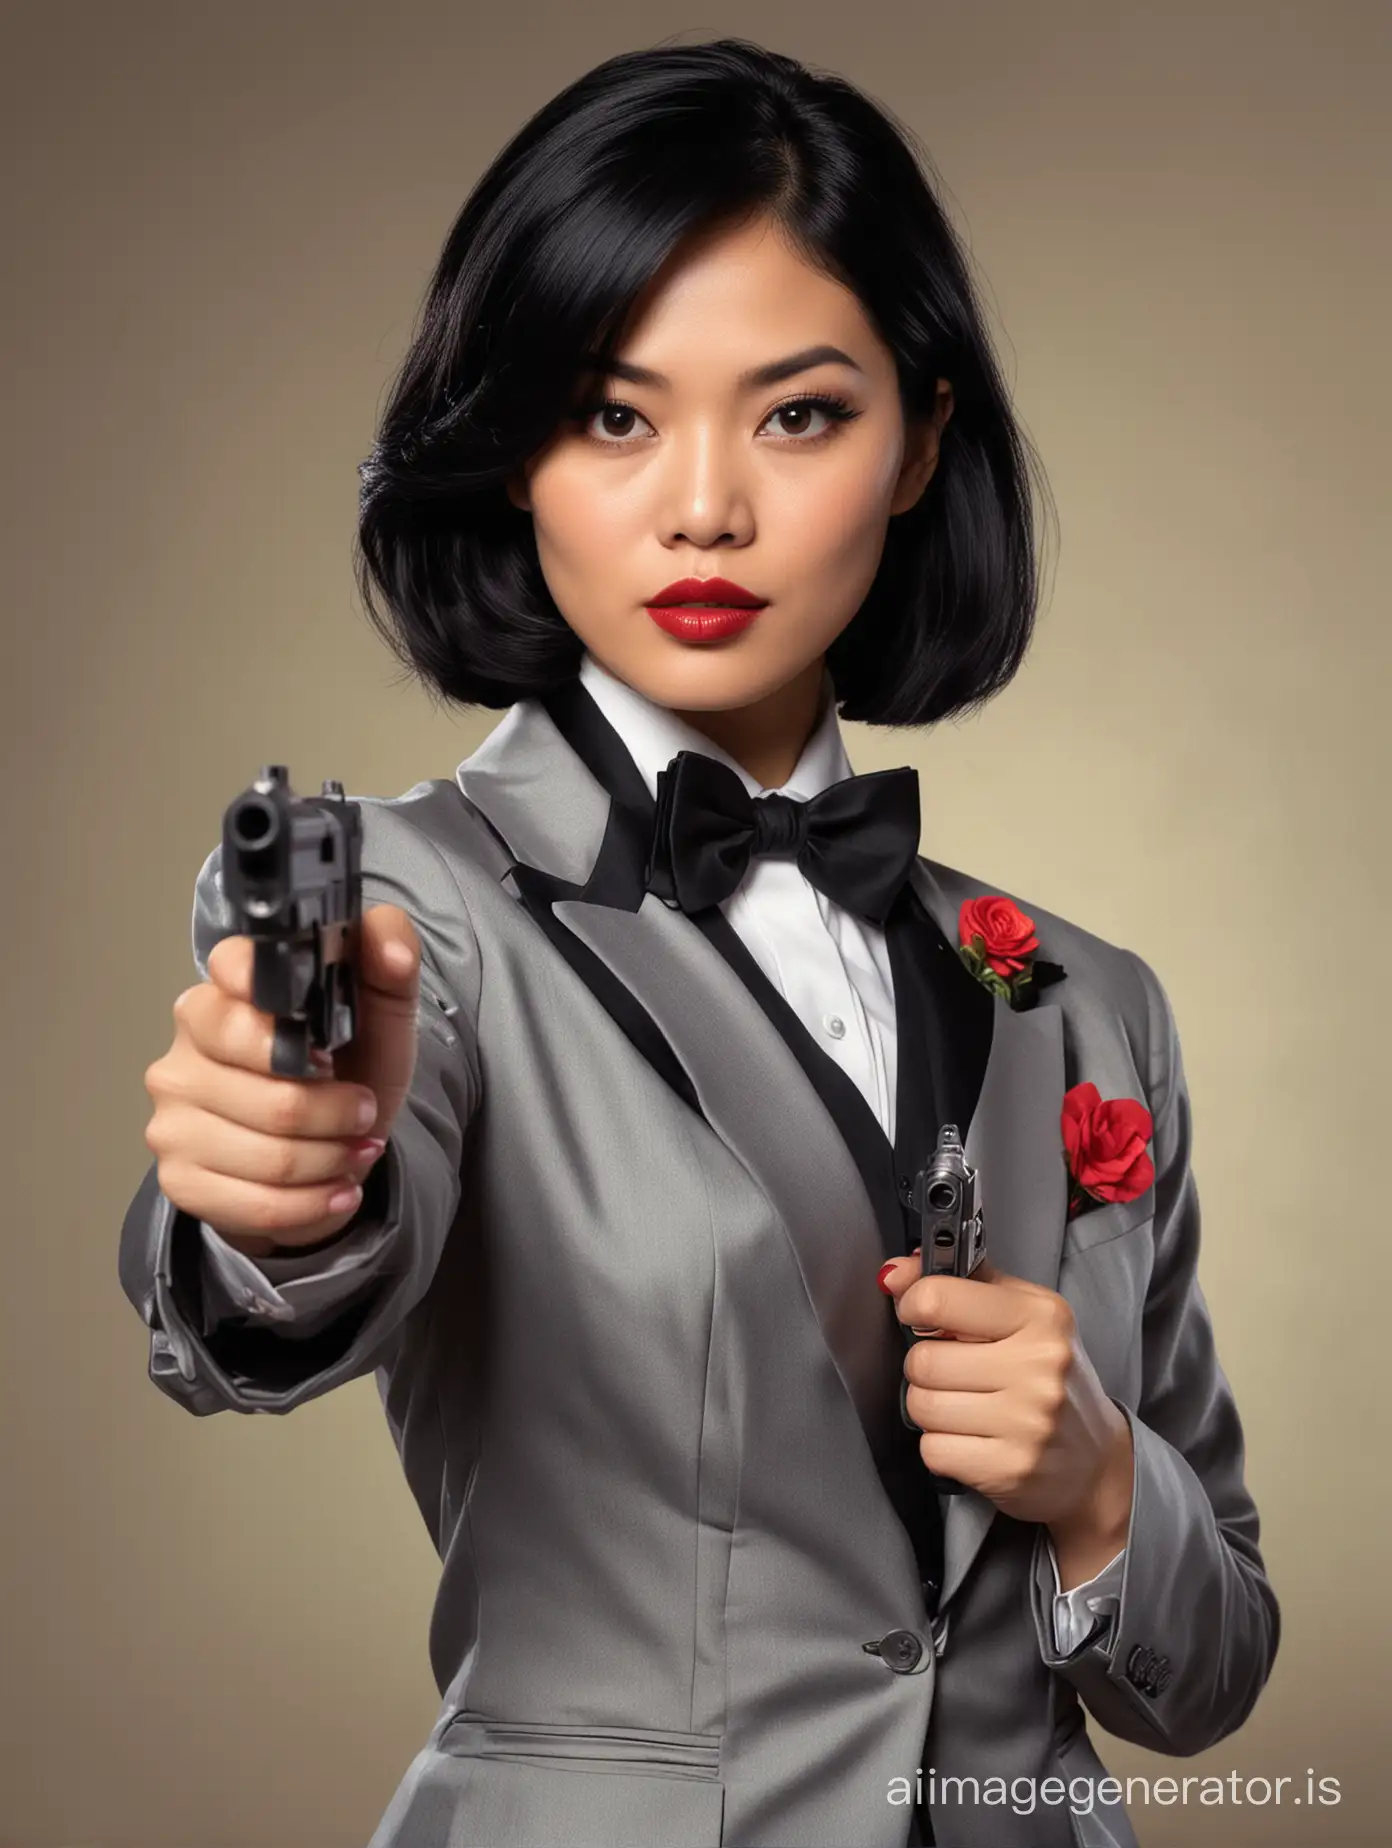 A female Vietnamese spy with shoulder length black hair and lipstick.  She is wearing a formal tuxedo with a black bowtie.  Her jacket is not buttoned.  Her jacket has a corsage.  She is pointing a gun.